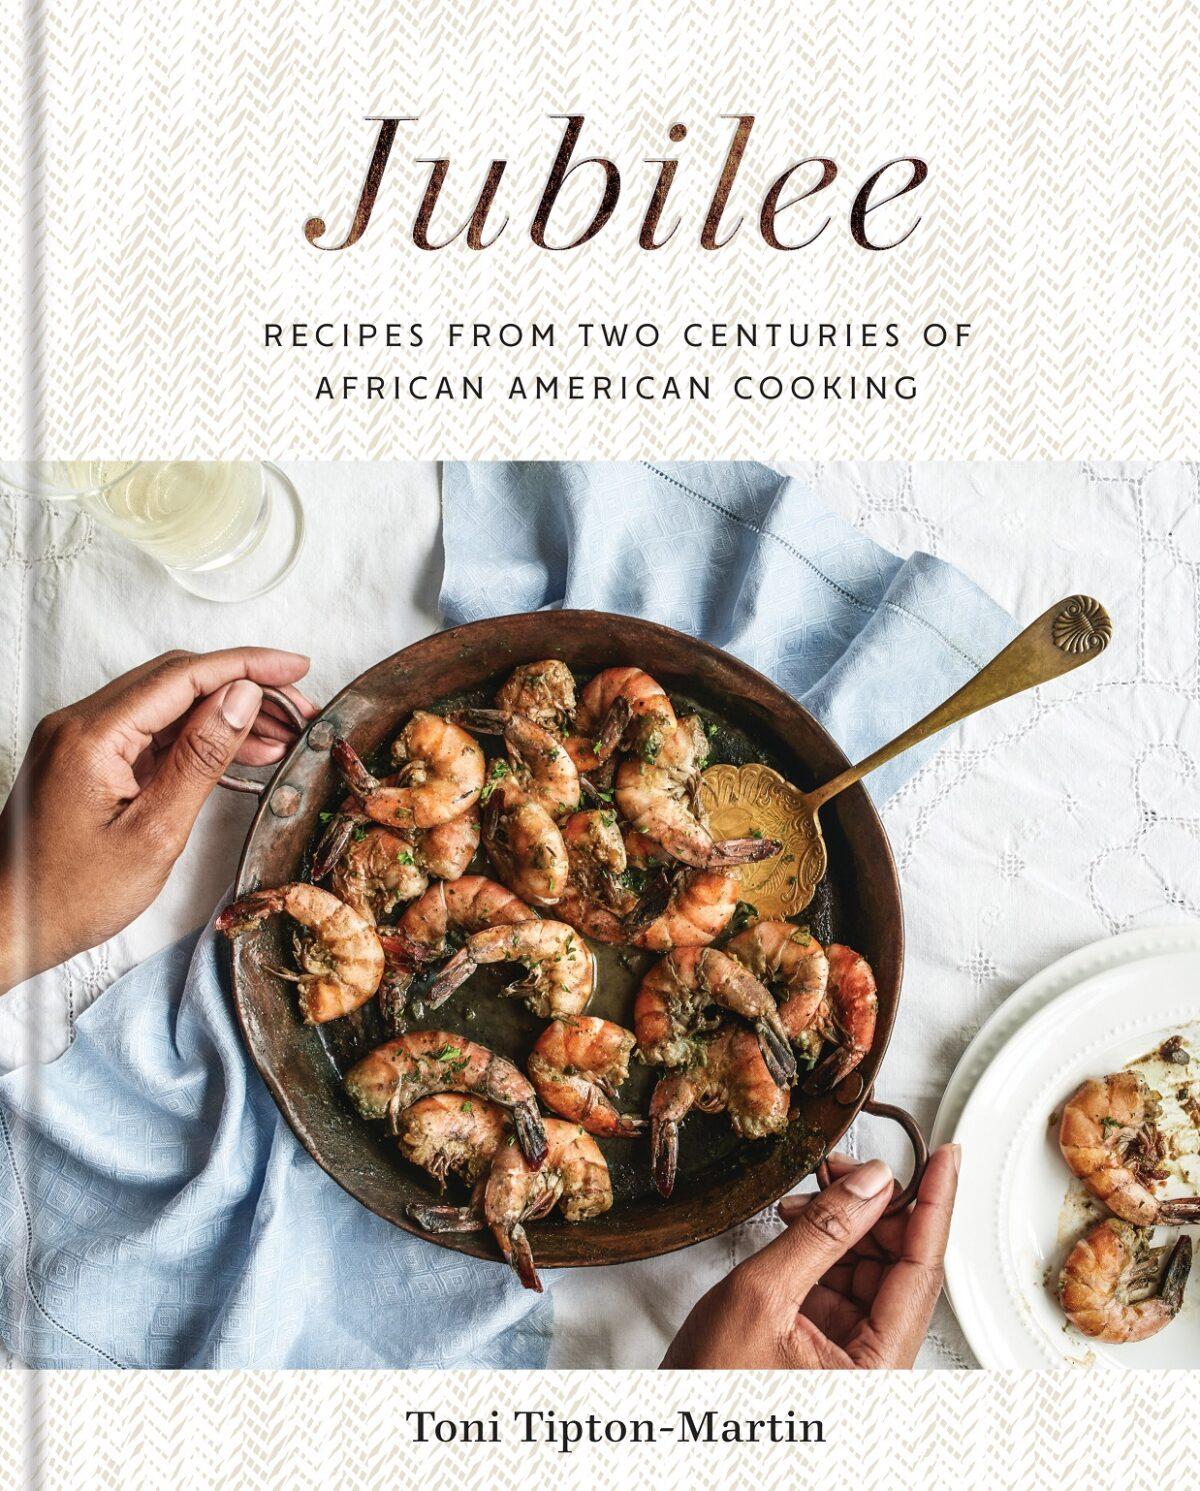 "Jubilee: Recipes from Two Centuries of African American Cooking" by Toni Tipton-Martin (Clarkson Potter, $35).